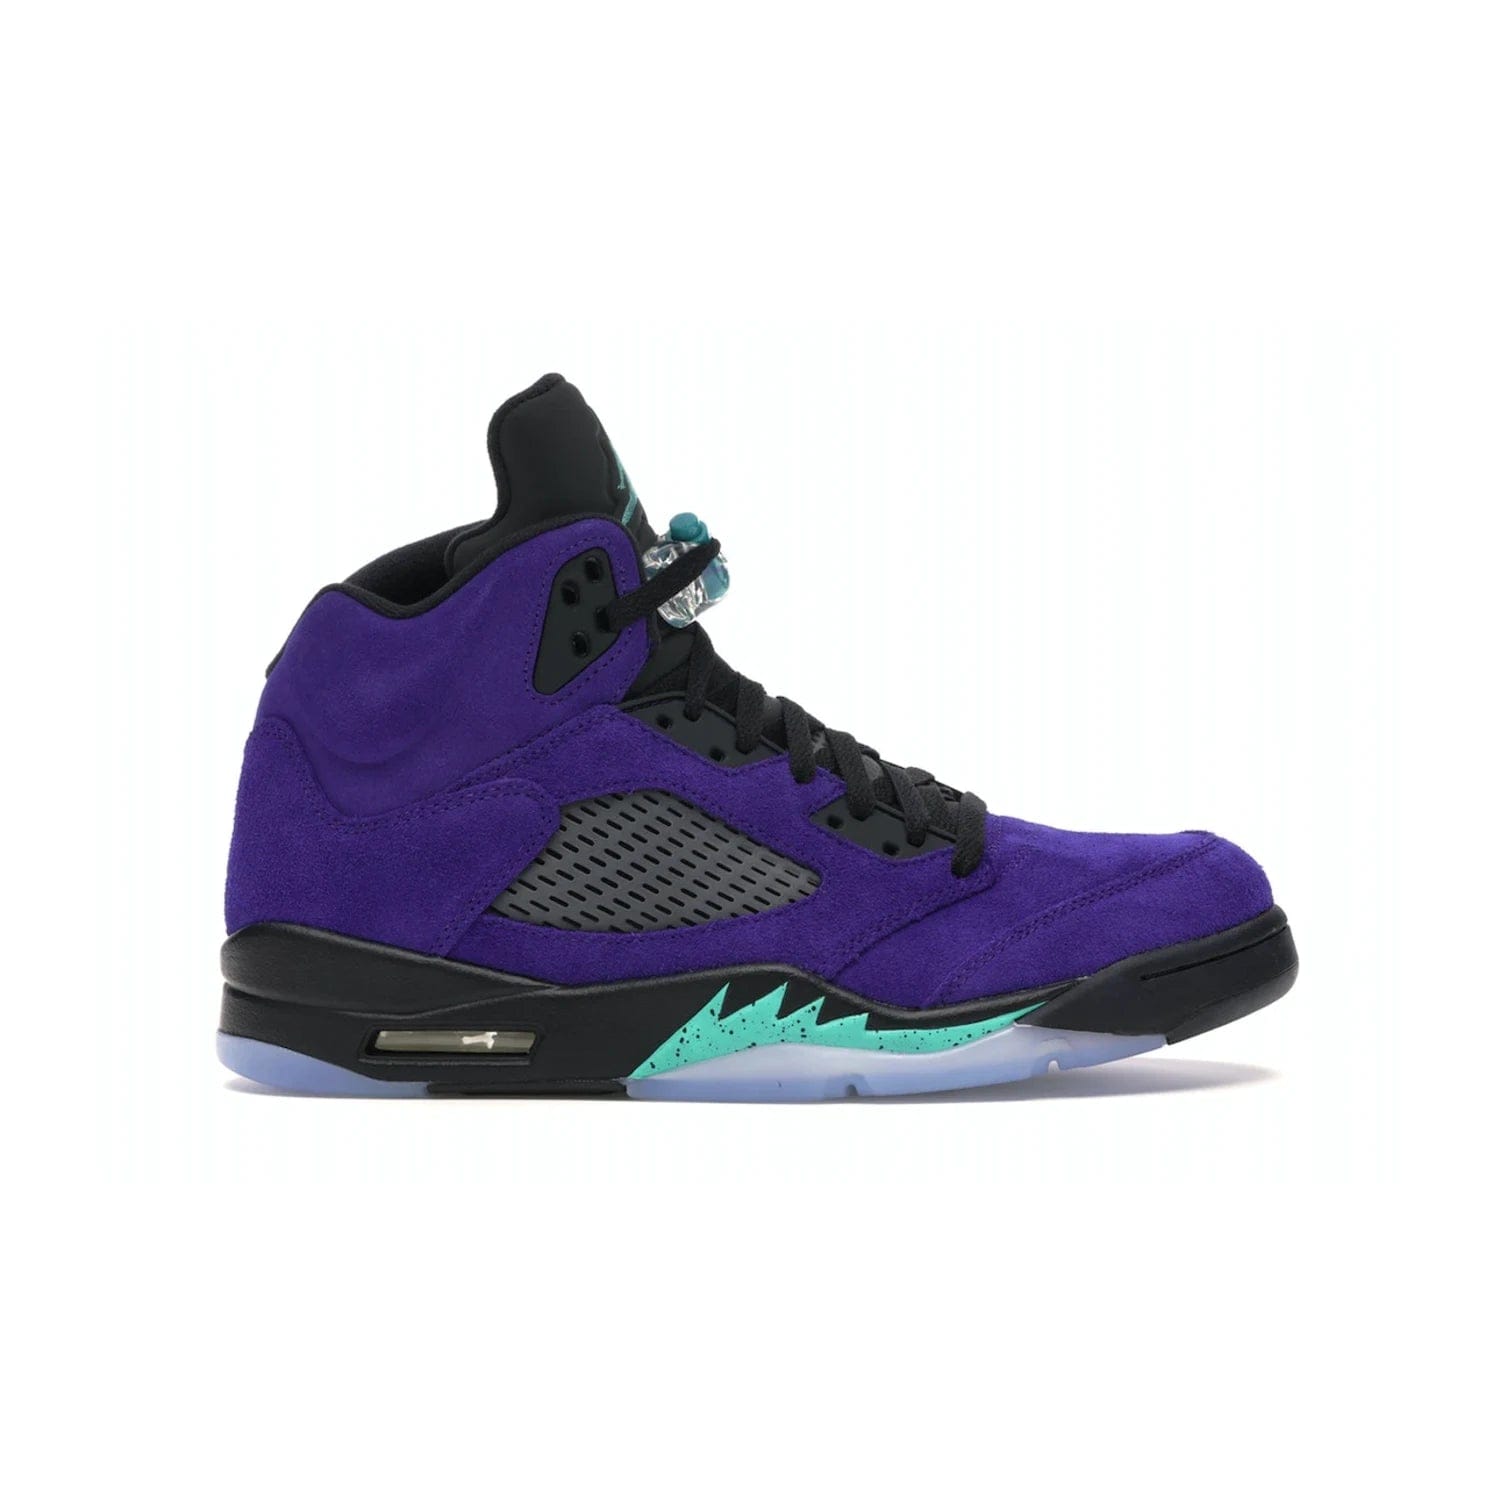 Jordan 5 Retro Alternate Grape - Image 1 - Only at www.BallersClubKickz.com - Bring the classic Jordan 5 Retro Alternate Grape to your sneaker collection! Featuring a purple suede upper, charcoal underlays, green detailing, and an icy and green outsole. Releasing for the first time since 1990, don't miss this chance to add a piece of sneaker history to your collection.